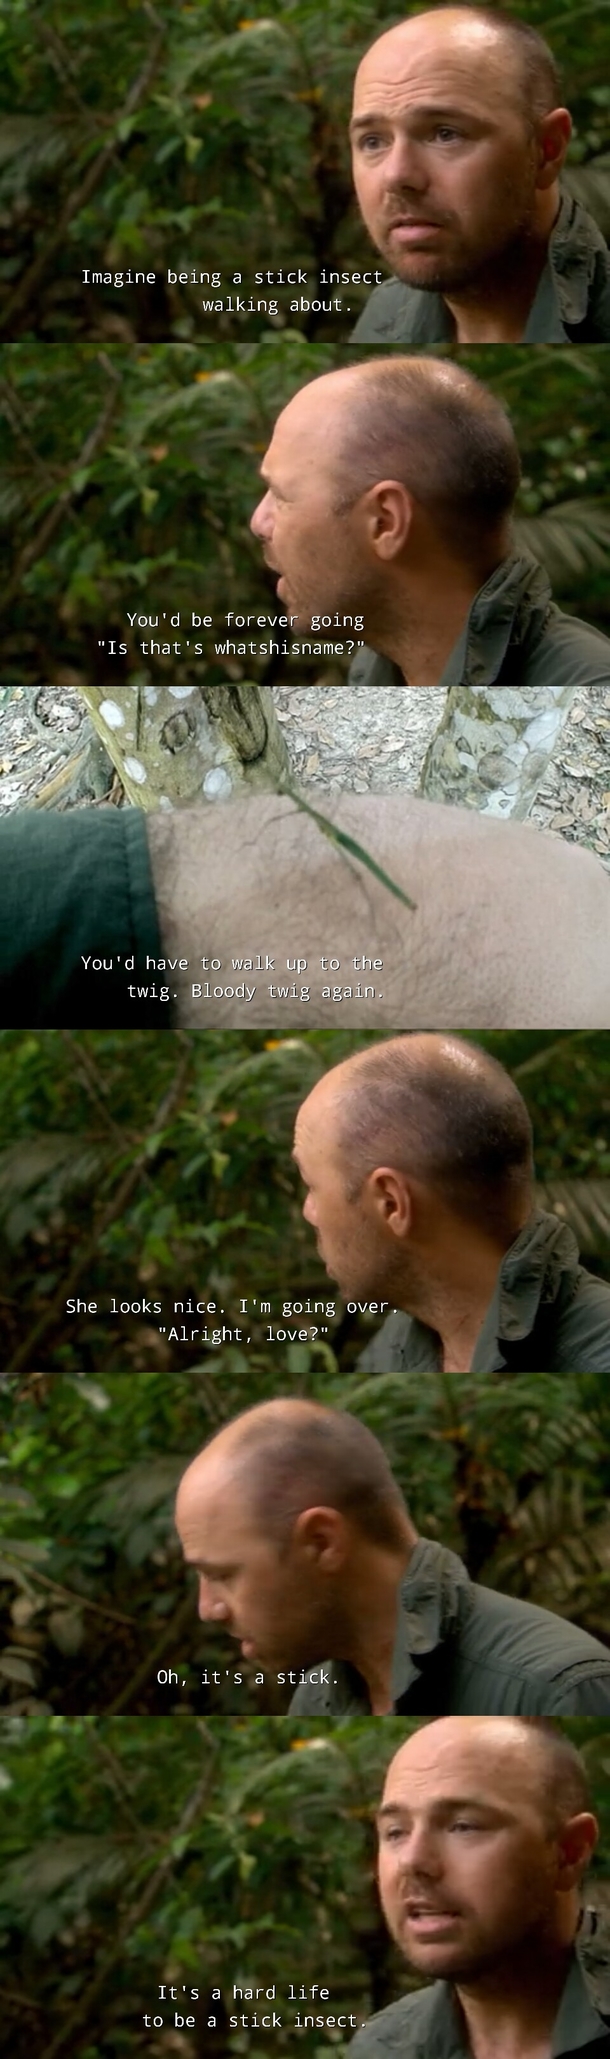 Its a hard life to be a stick insect